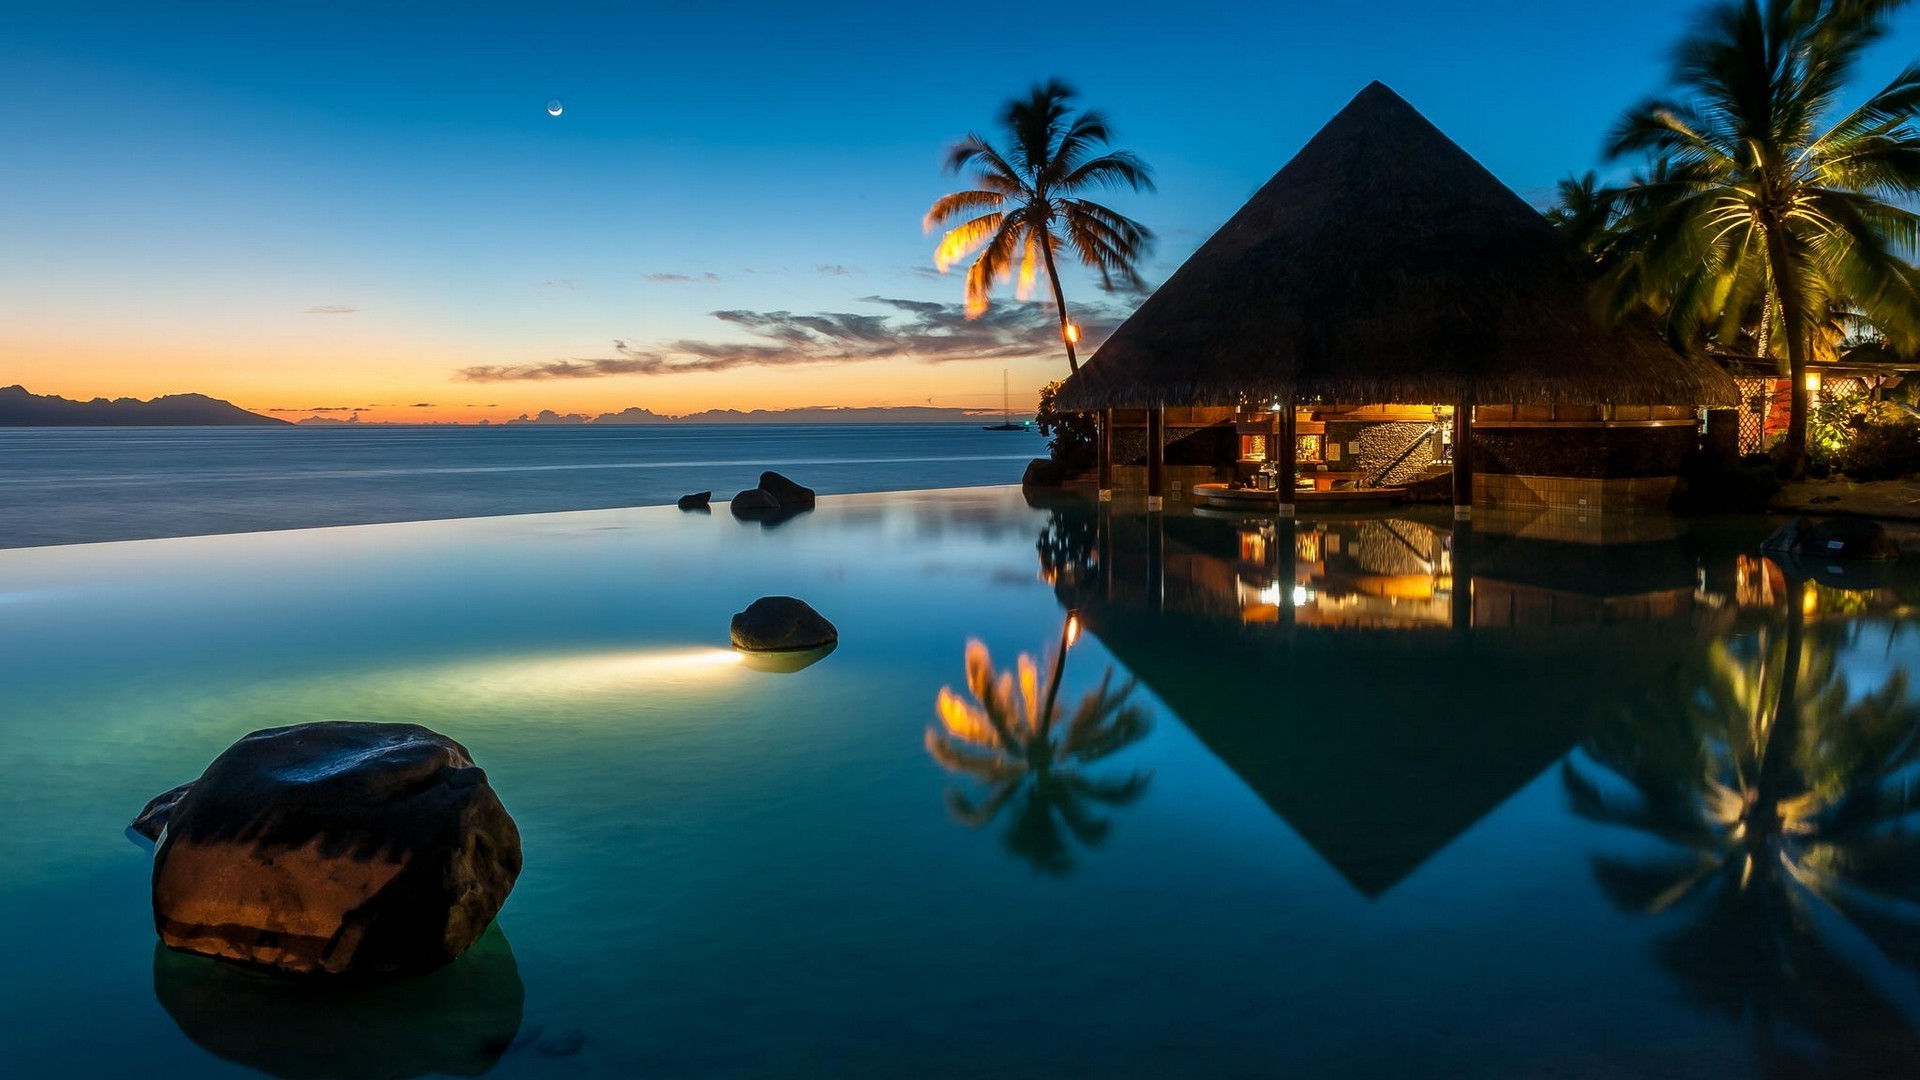 nature, Landscape, French Polynesia, Swimming Pool, Resort, Sunset, Palm Trees, Bar, Lights, Sea, Beach, Reflection, Blue, Moon, Water Wallpaper